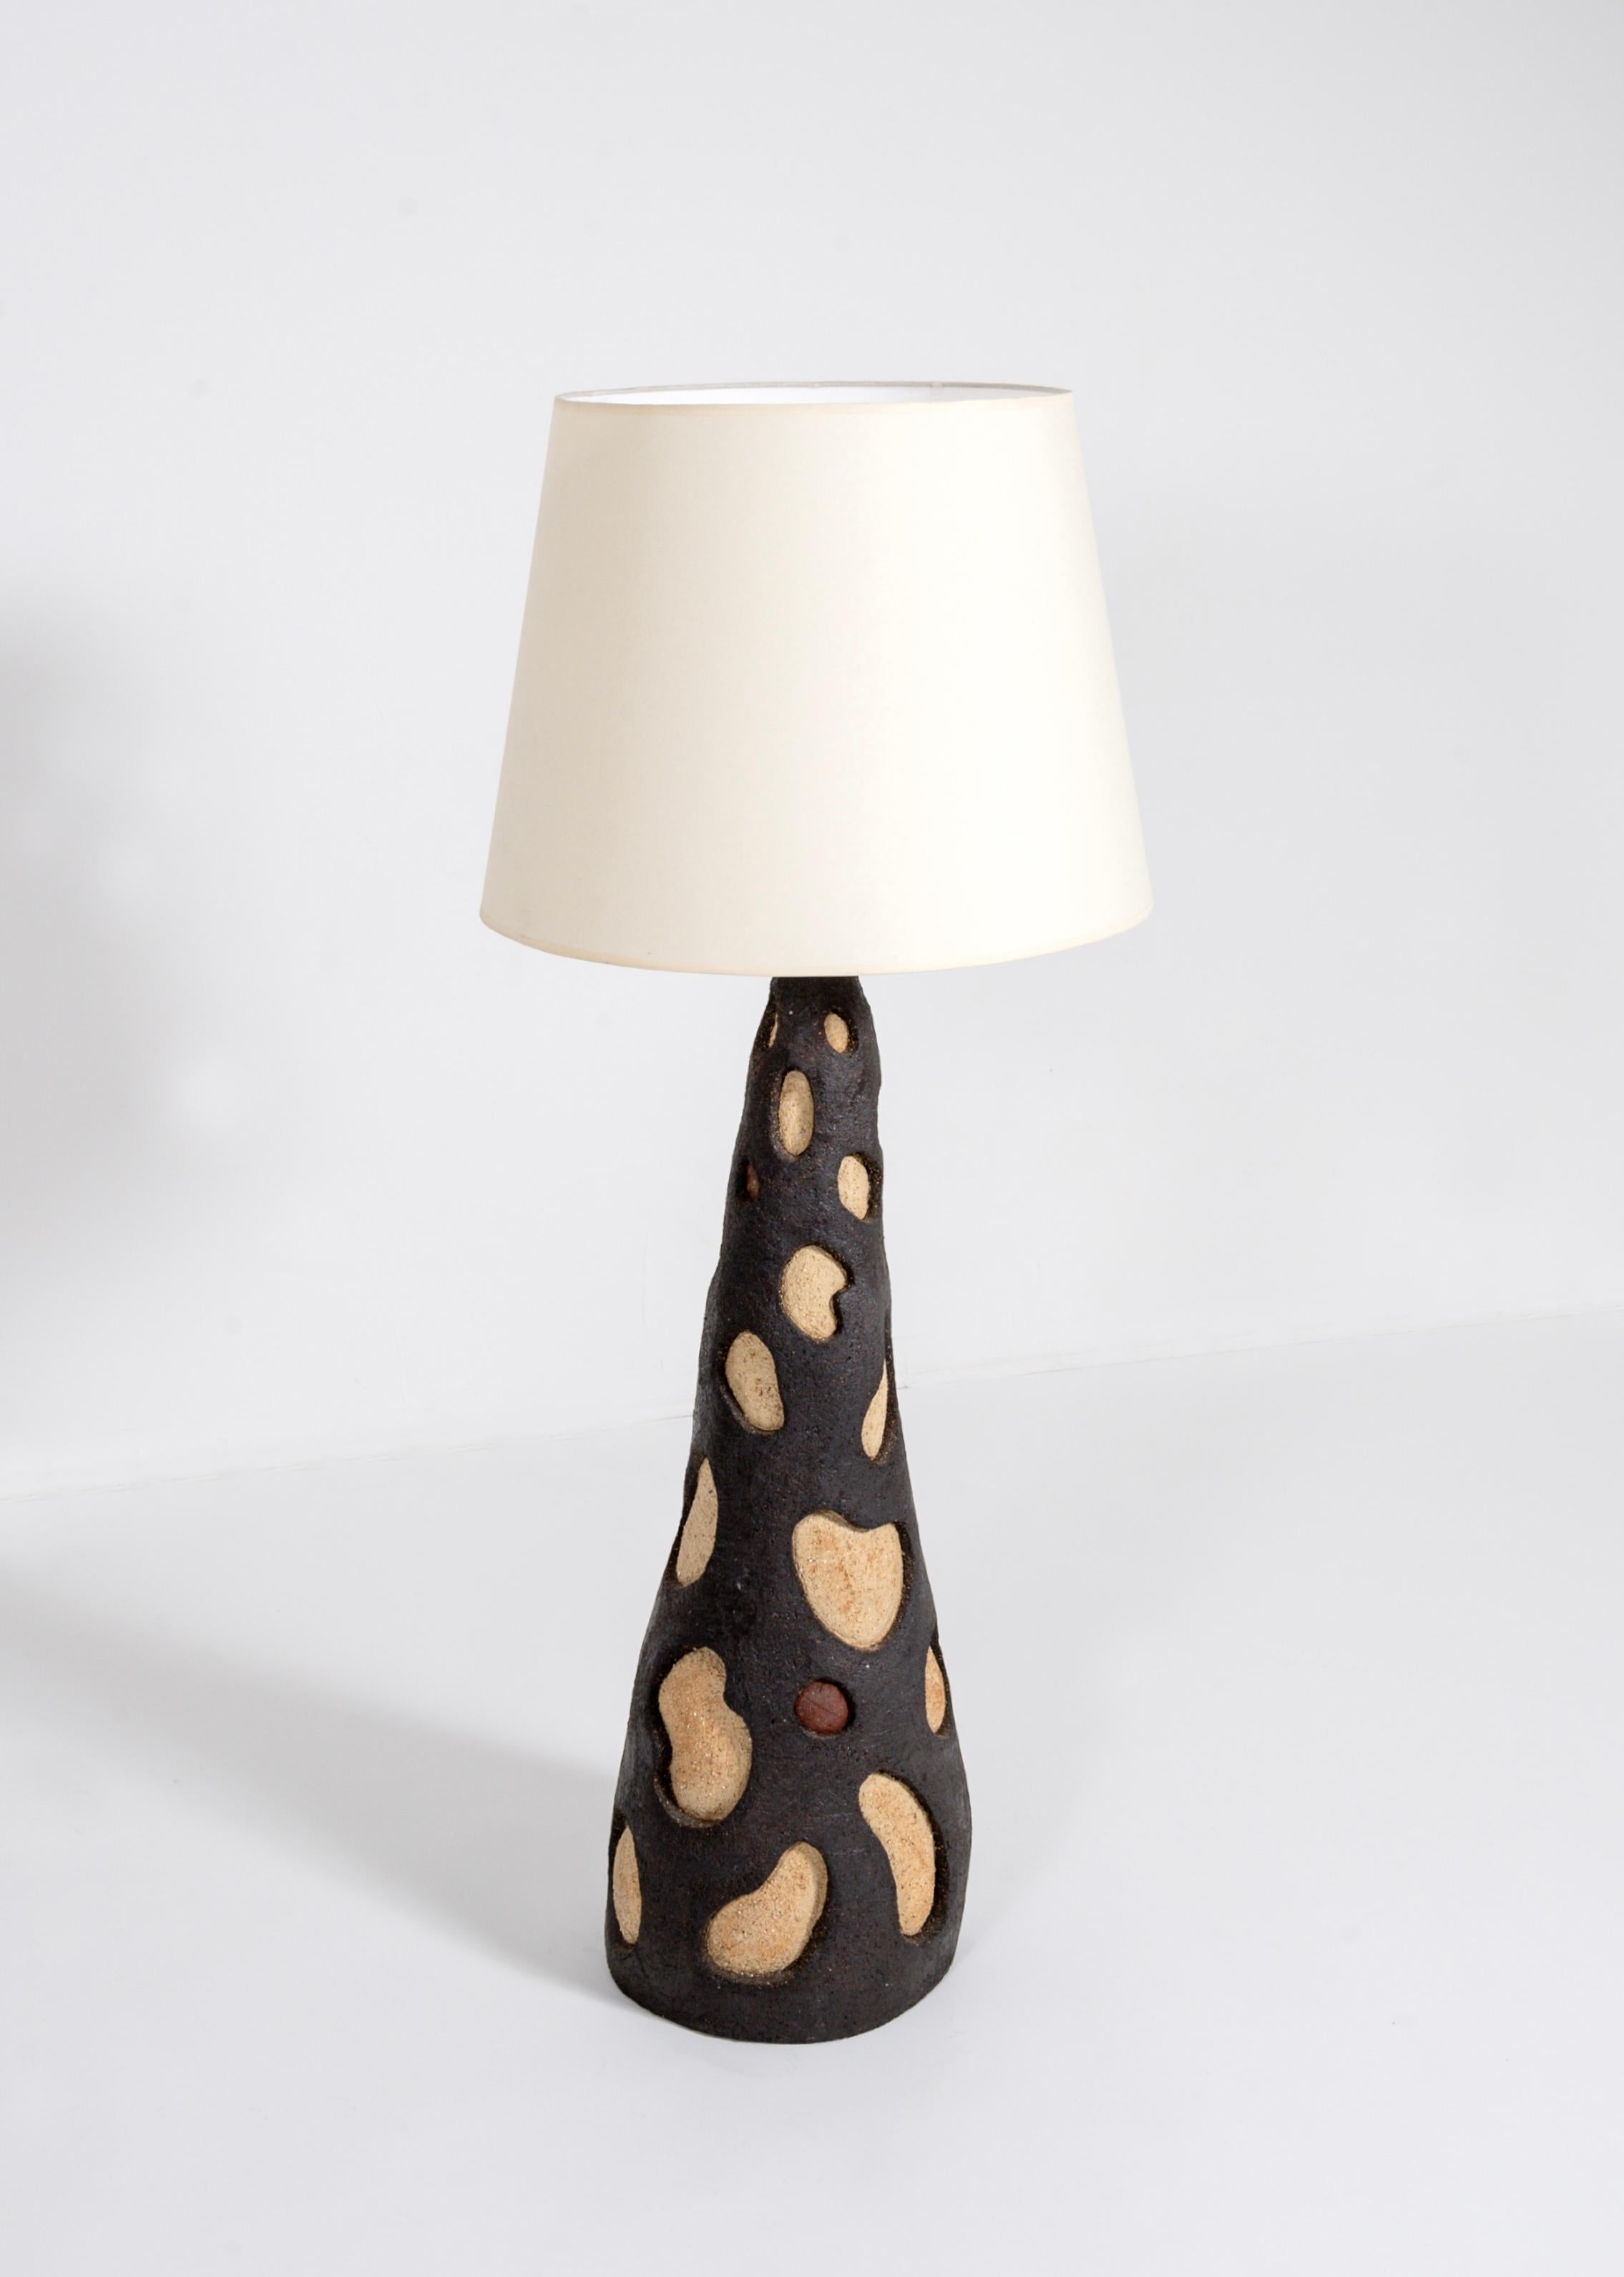 Important Contemporary Ceramic Table Lamp by Agnès Debizet In Excellent Condition For Sale In London, GB